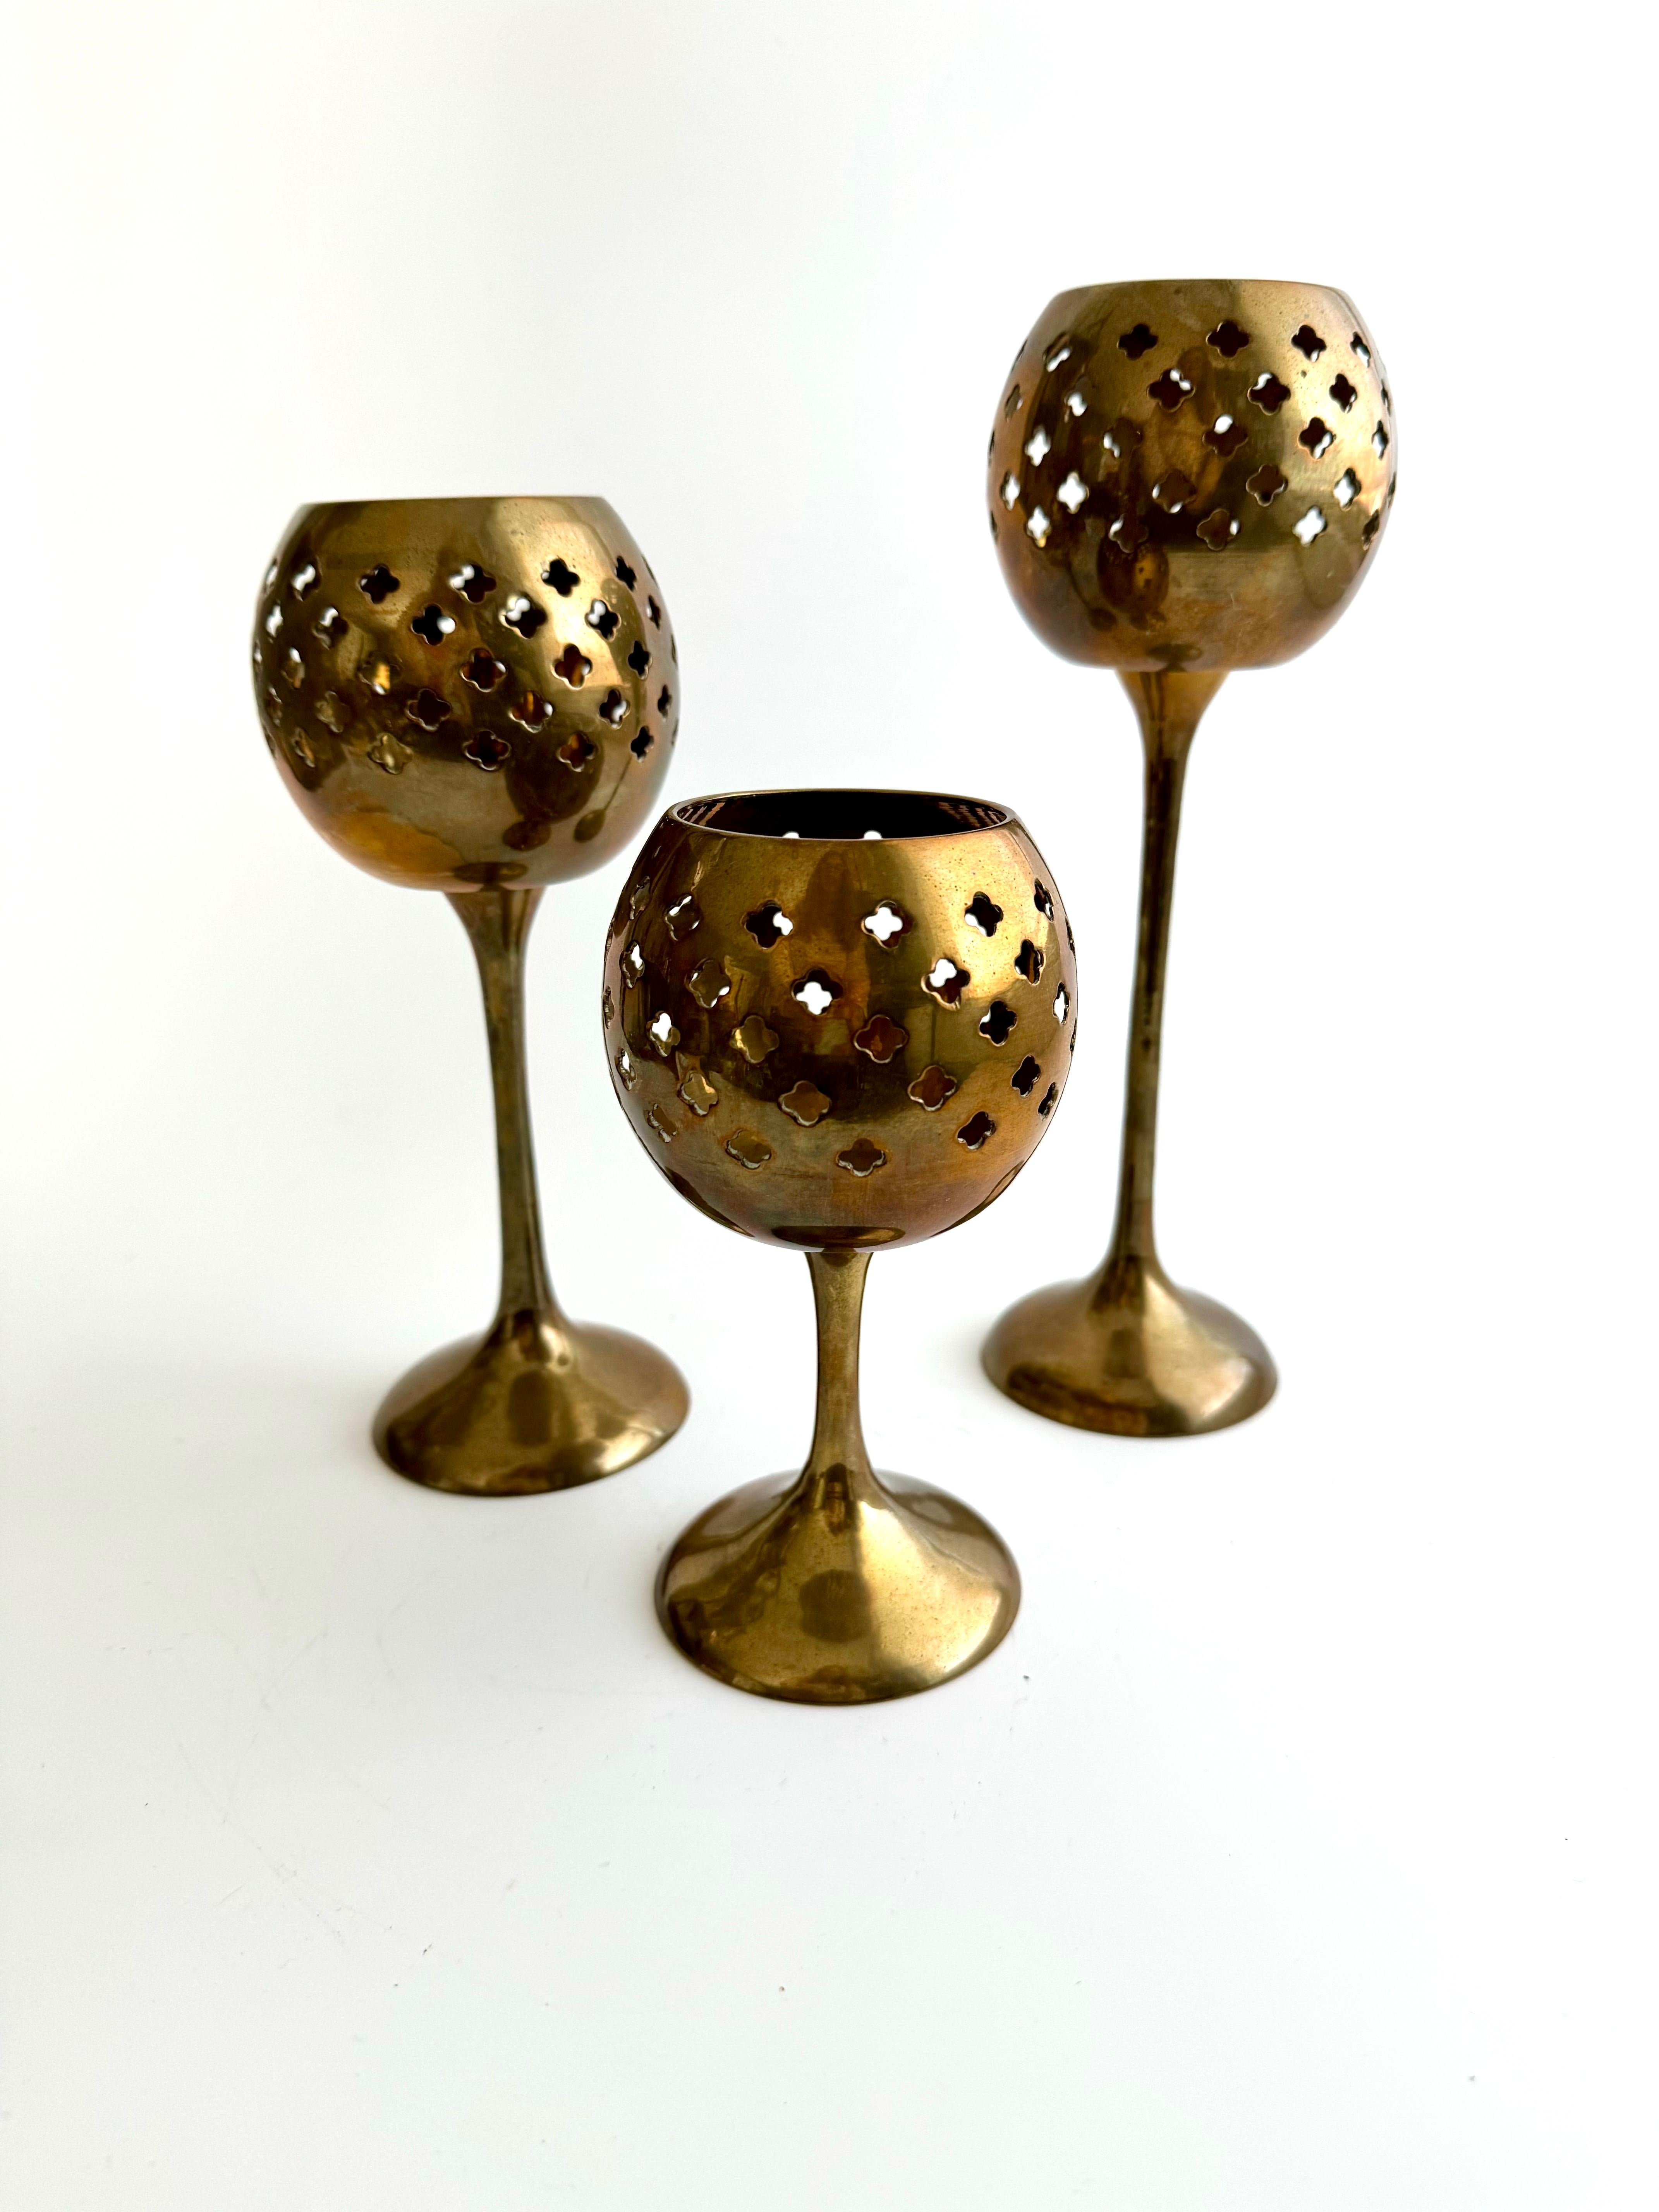 Illuminate your space with the warmth of a bygone era. This exquisite set of three vintage votive candleholders brings the timeless elegance of Indian craftsmanship to your home. Hailing from the rich cultural heritage of India, each piece has been